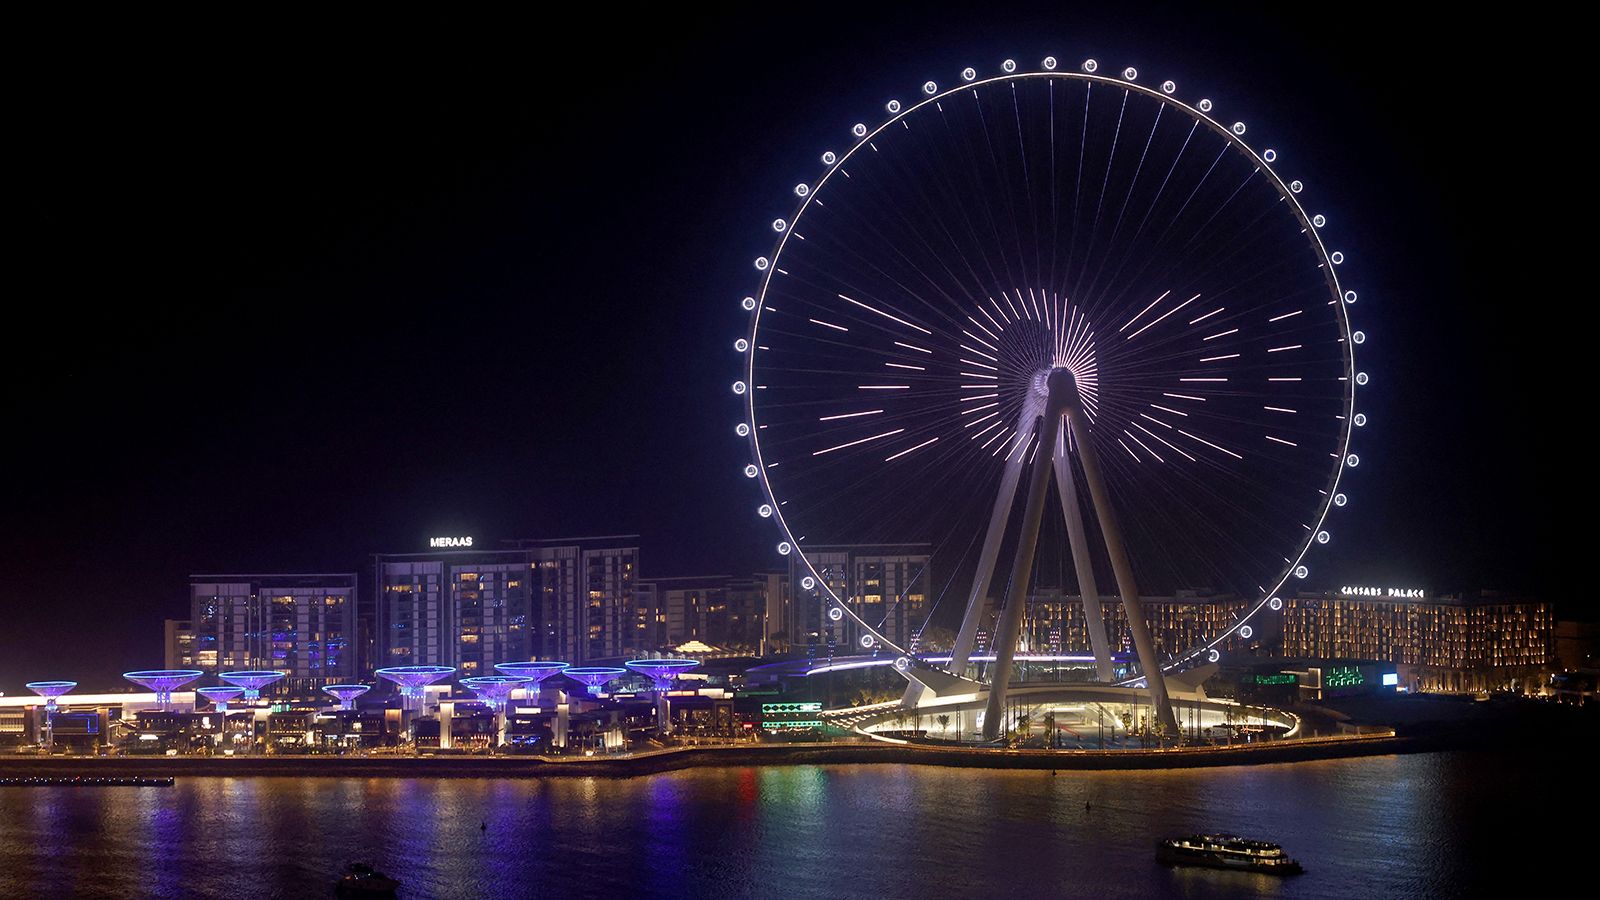 Thinking of traveling to Dubai on vacation? Here are just few of the attractions on offer. You could <strong>go on a round trip on Ain Dubai </strong>--<strong> </strong>the world's tallest Ferris wheel at <a href="index.php?page=&url=https%3A%2F%2Fcnn.com%2Ftravel%2Farticle%2Fain-dubai-worlds-largest-observation-wheel%2Findex.html" target="_blank">250 meters</a> (820 feet) high. Opened in October 2021, Ain Dubai is offering a range of tickets, including shared or private cabins, along with "social cabins" where drinks are served on the roughly 40-minute journey. Prices start at <a href="index.php?page=&url=https%3A%2F%2Fwww.aindubai.com%2Fen%2Fobservation-cabins" target="_blank" target="_blank">130 AED </a>($36). 